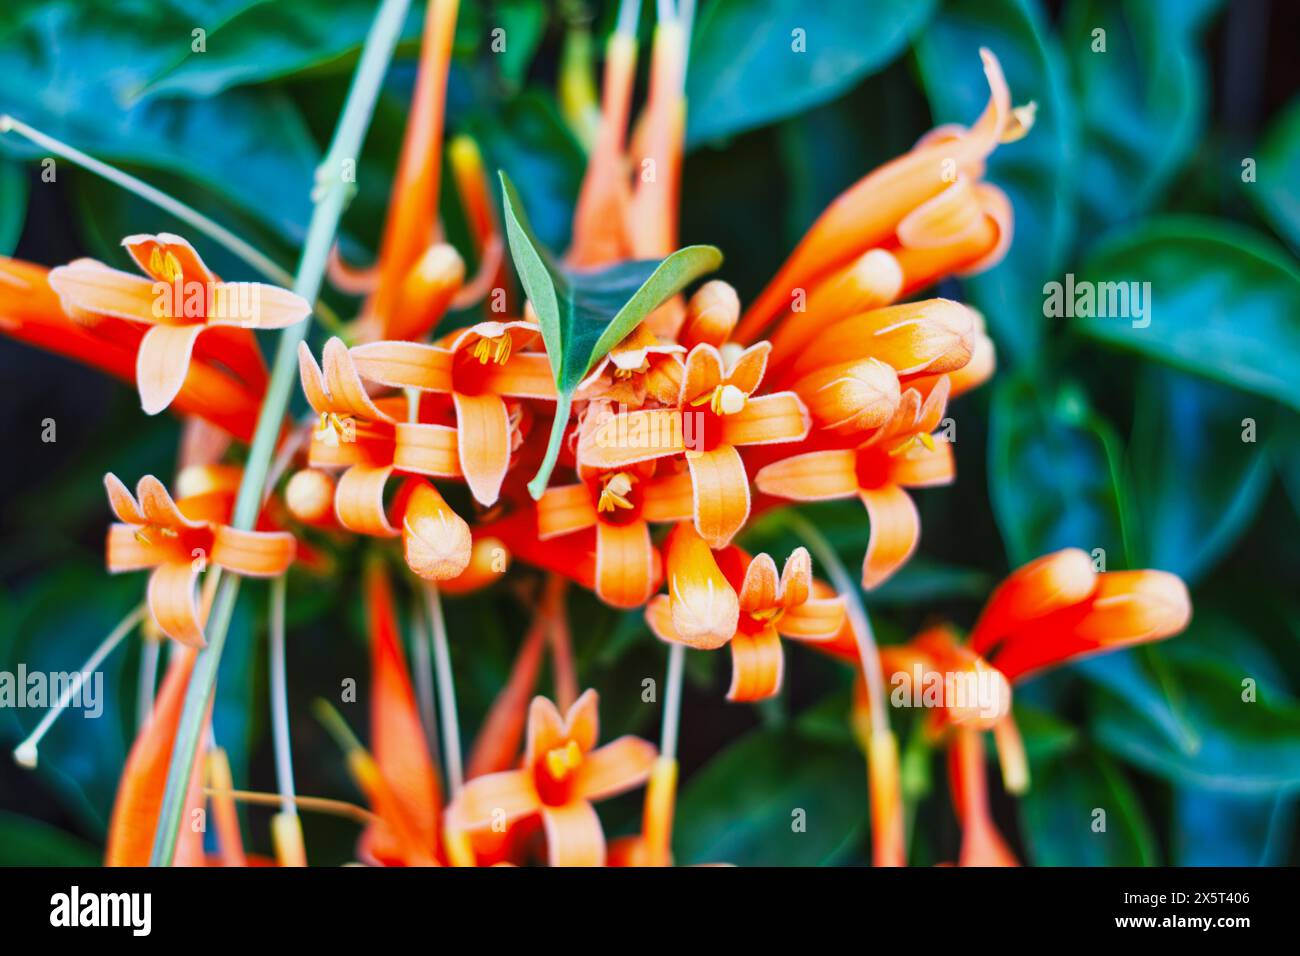 Flame Vine or Pyrostegia Venusta, wall ivy new blooming buds and orange colored trumpet flowers Stock Photo